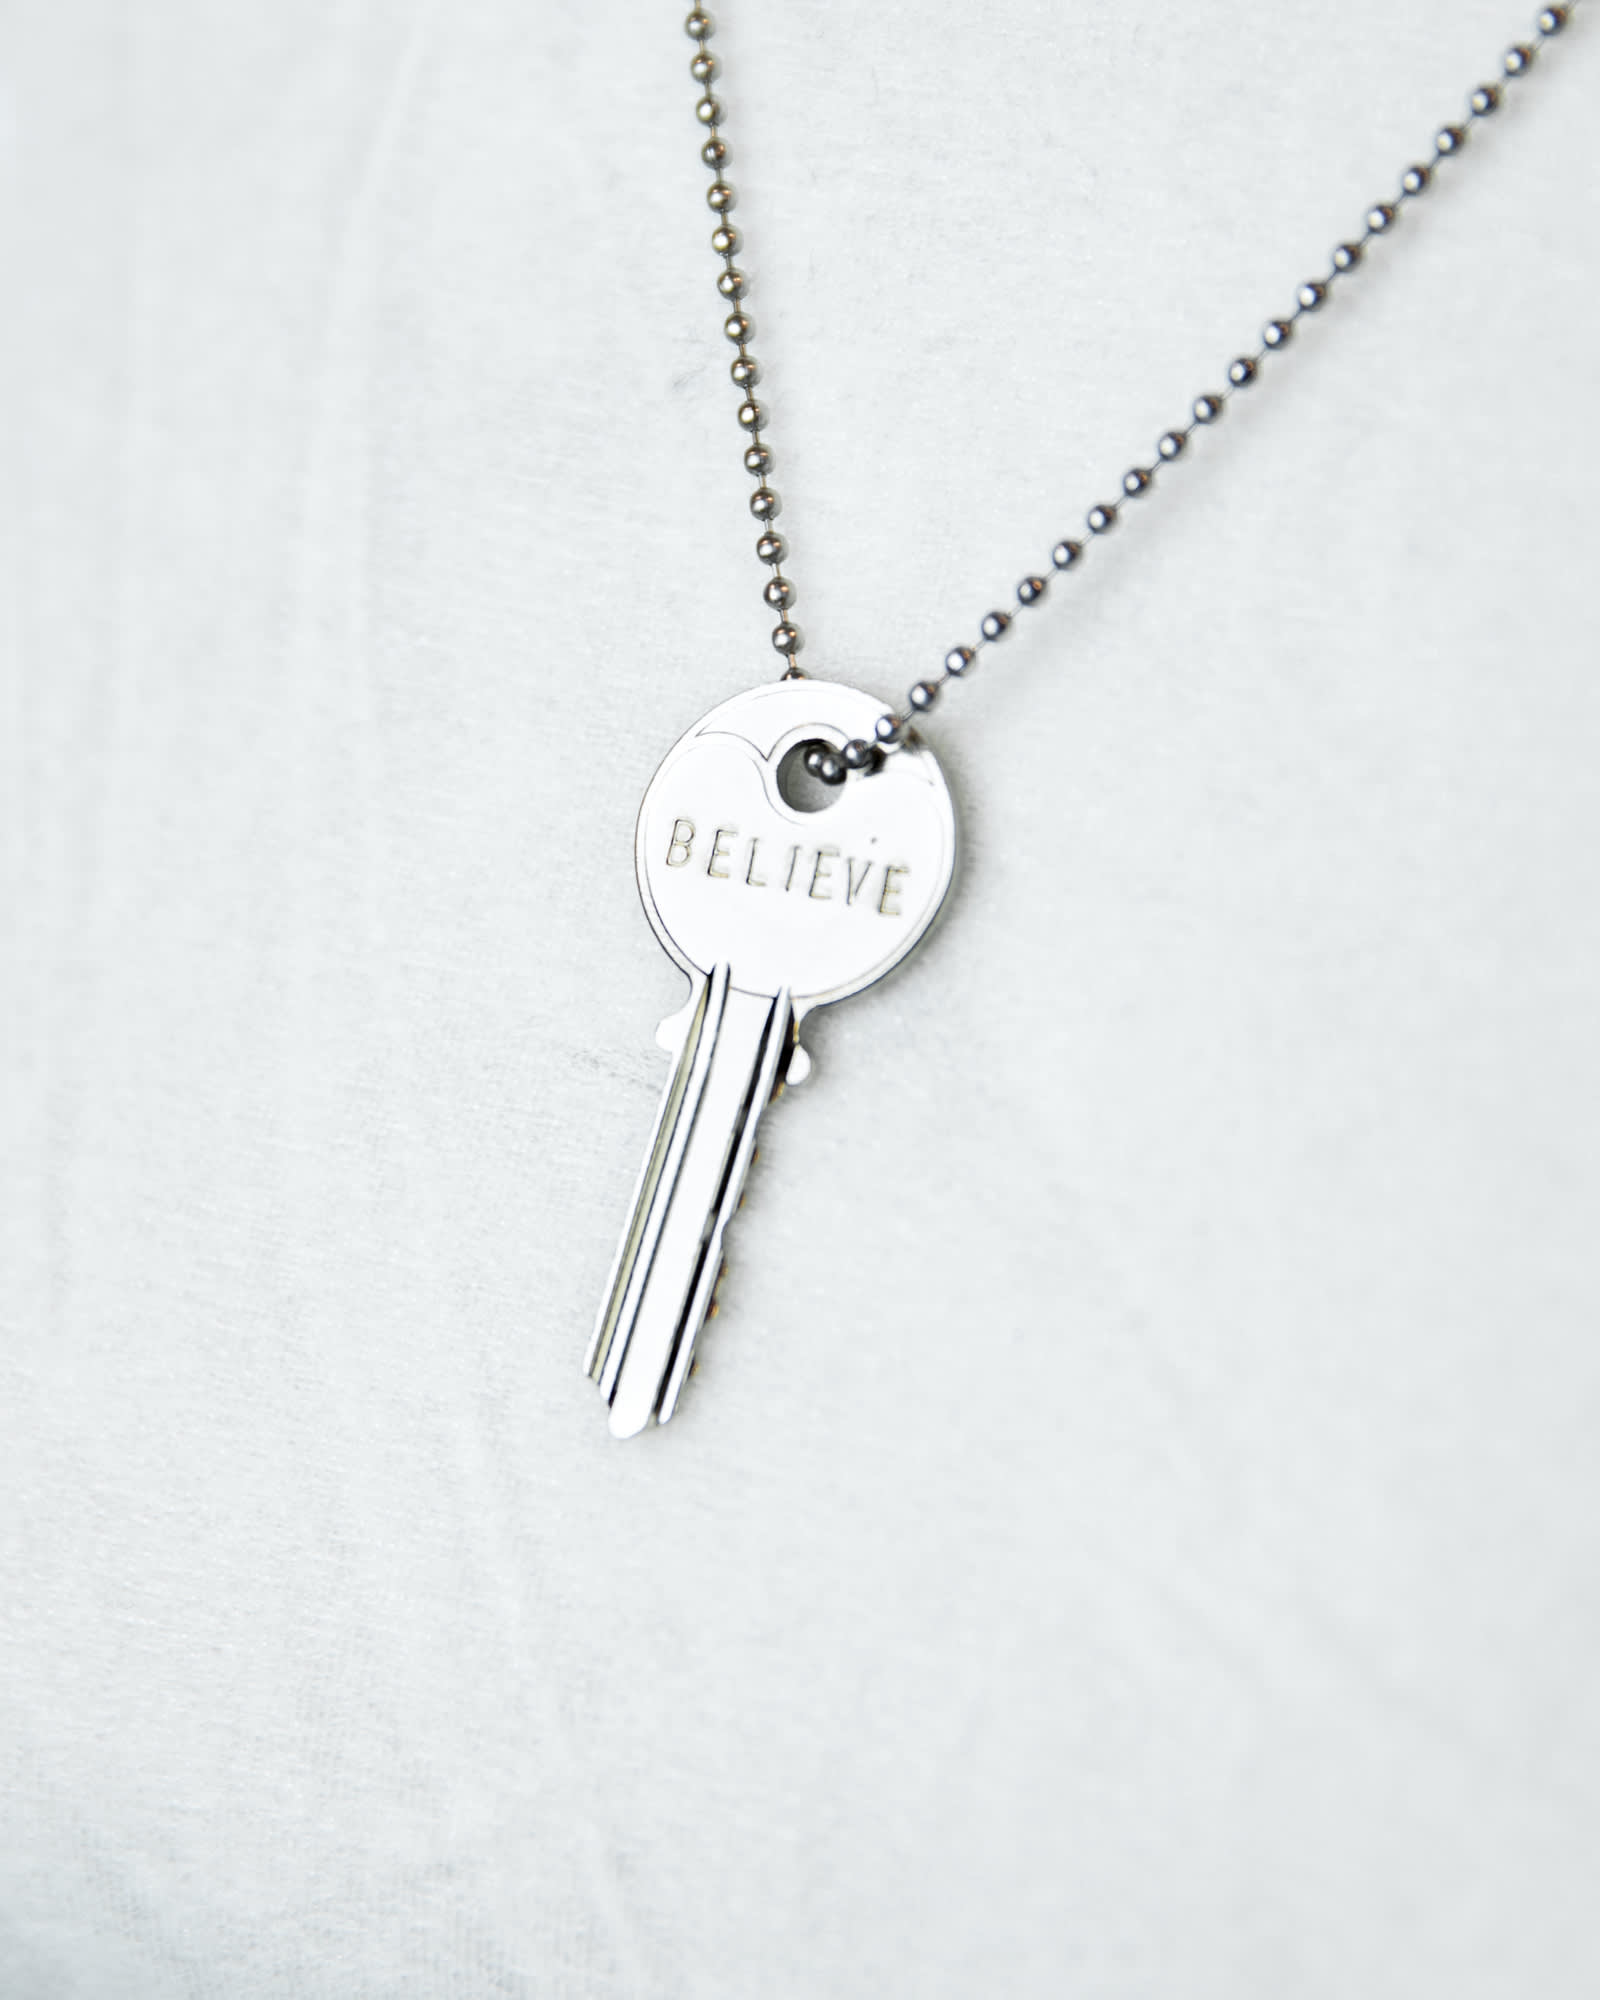 Pastel Blue Classic Ball Chain Key Necklace – The Giving Keys